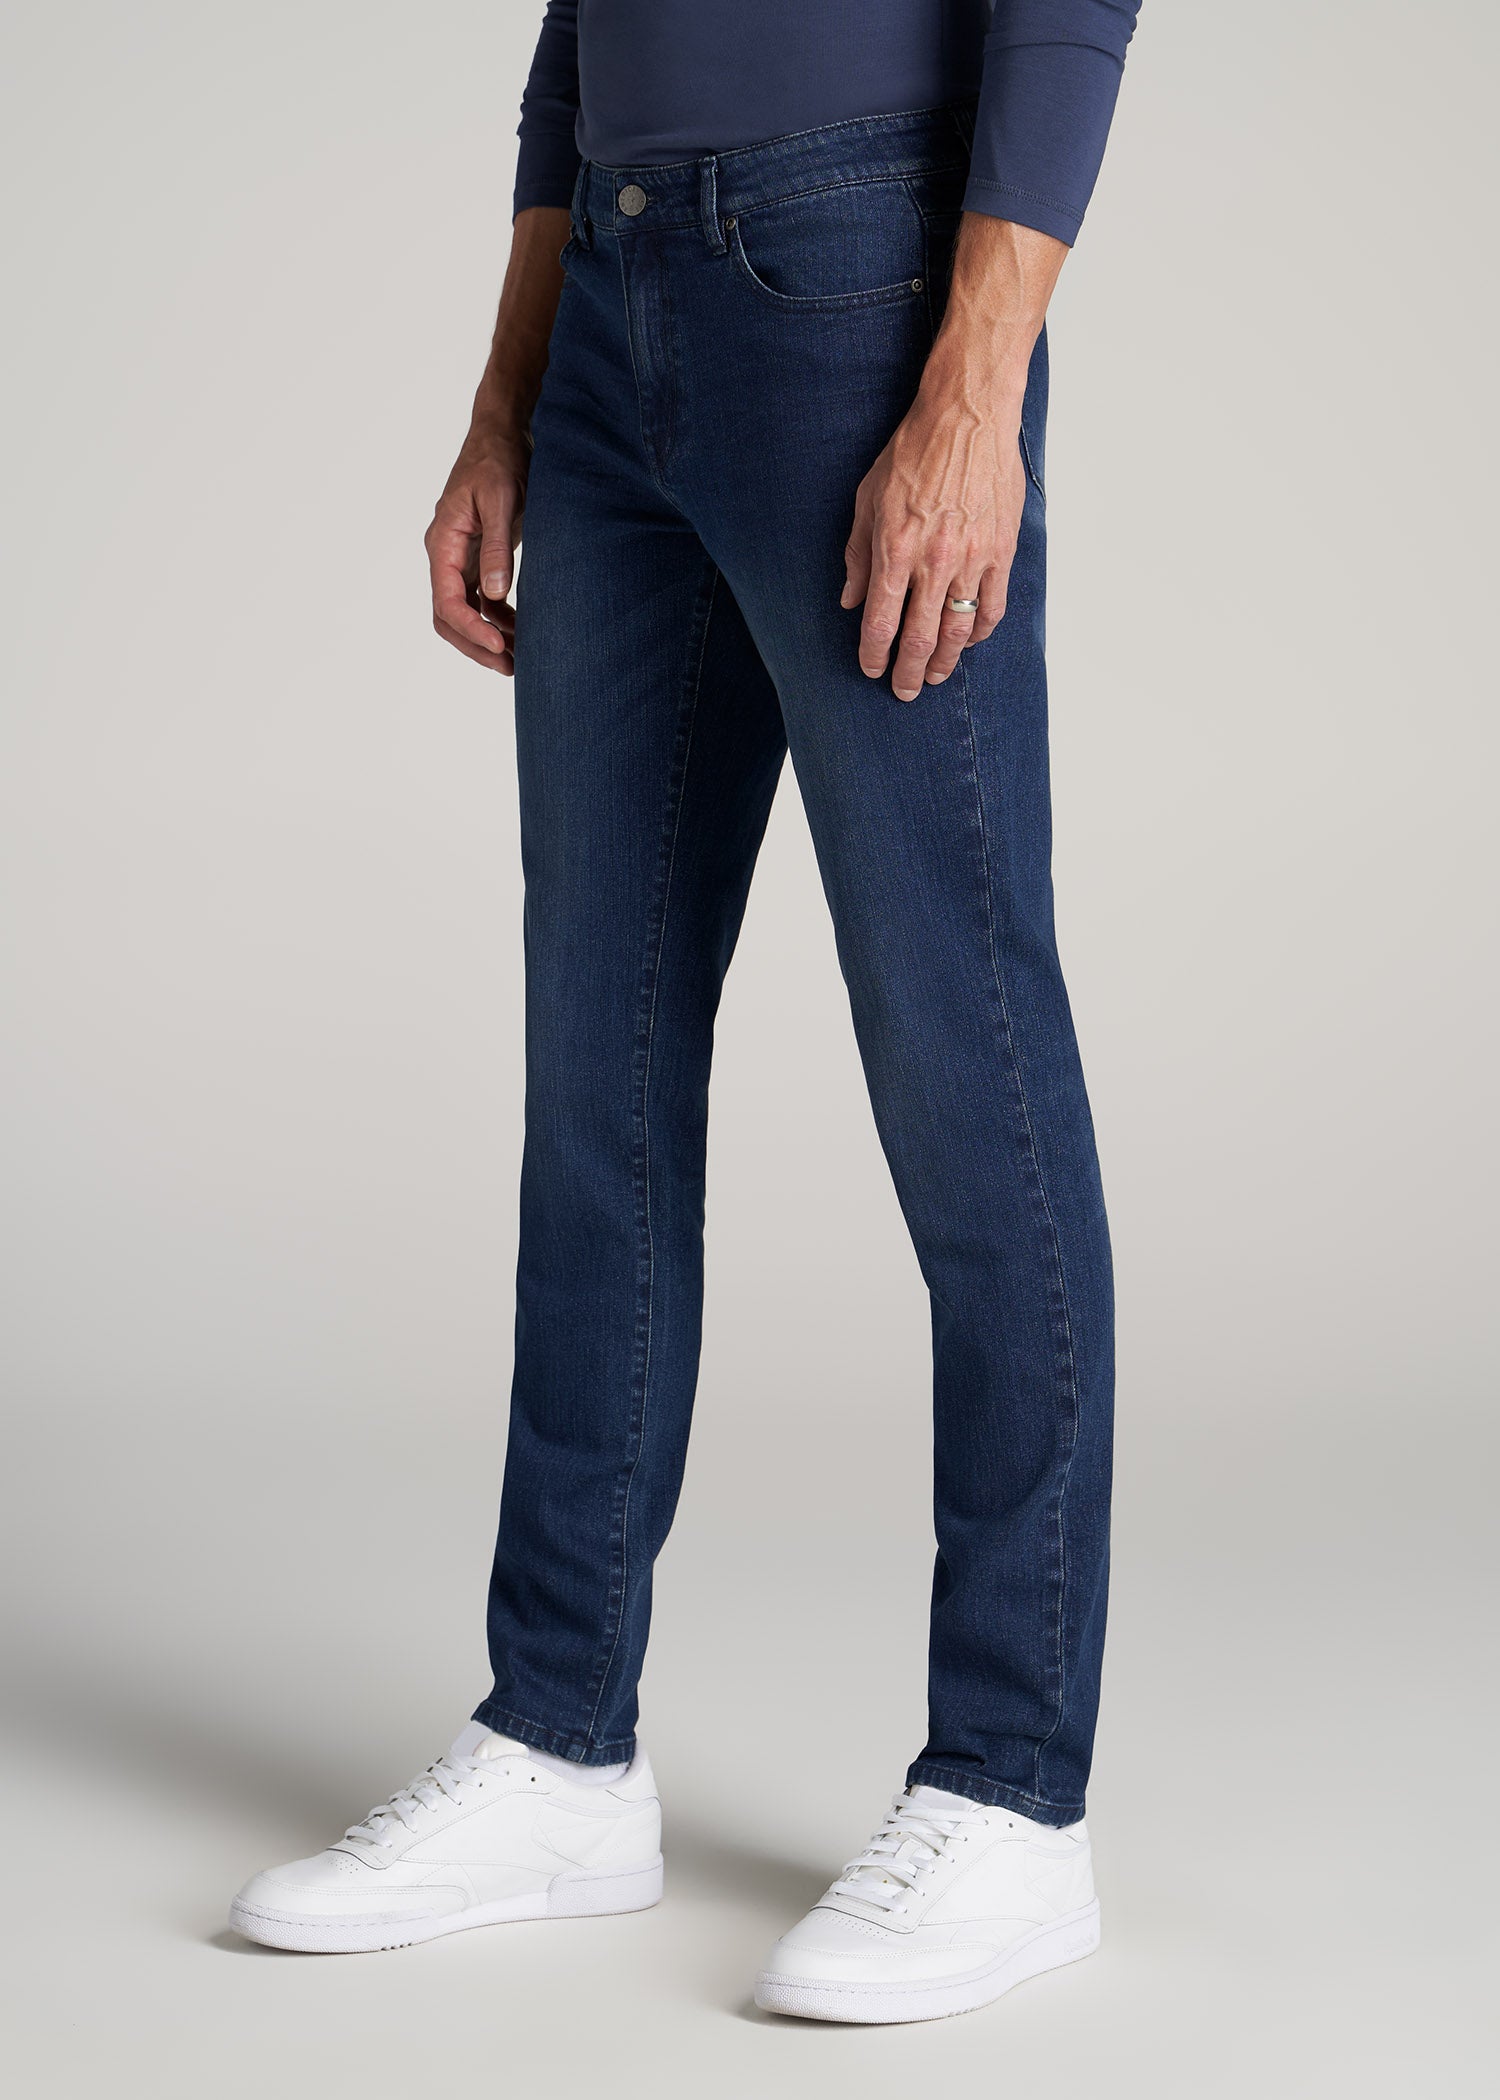 Dylan Slim Fit Jeans Atlantic Blue For Tall Men | American Tall